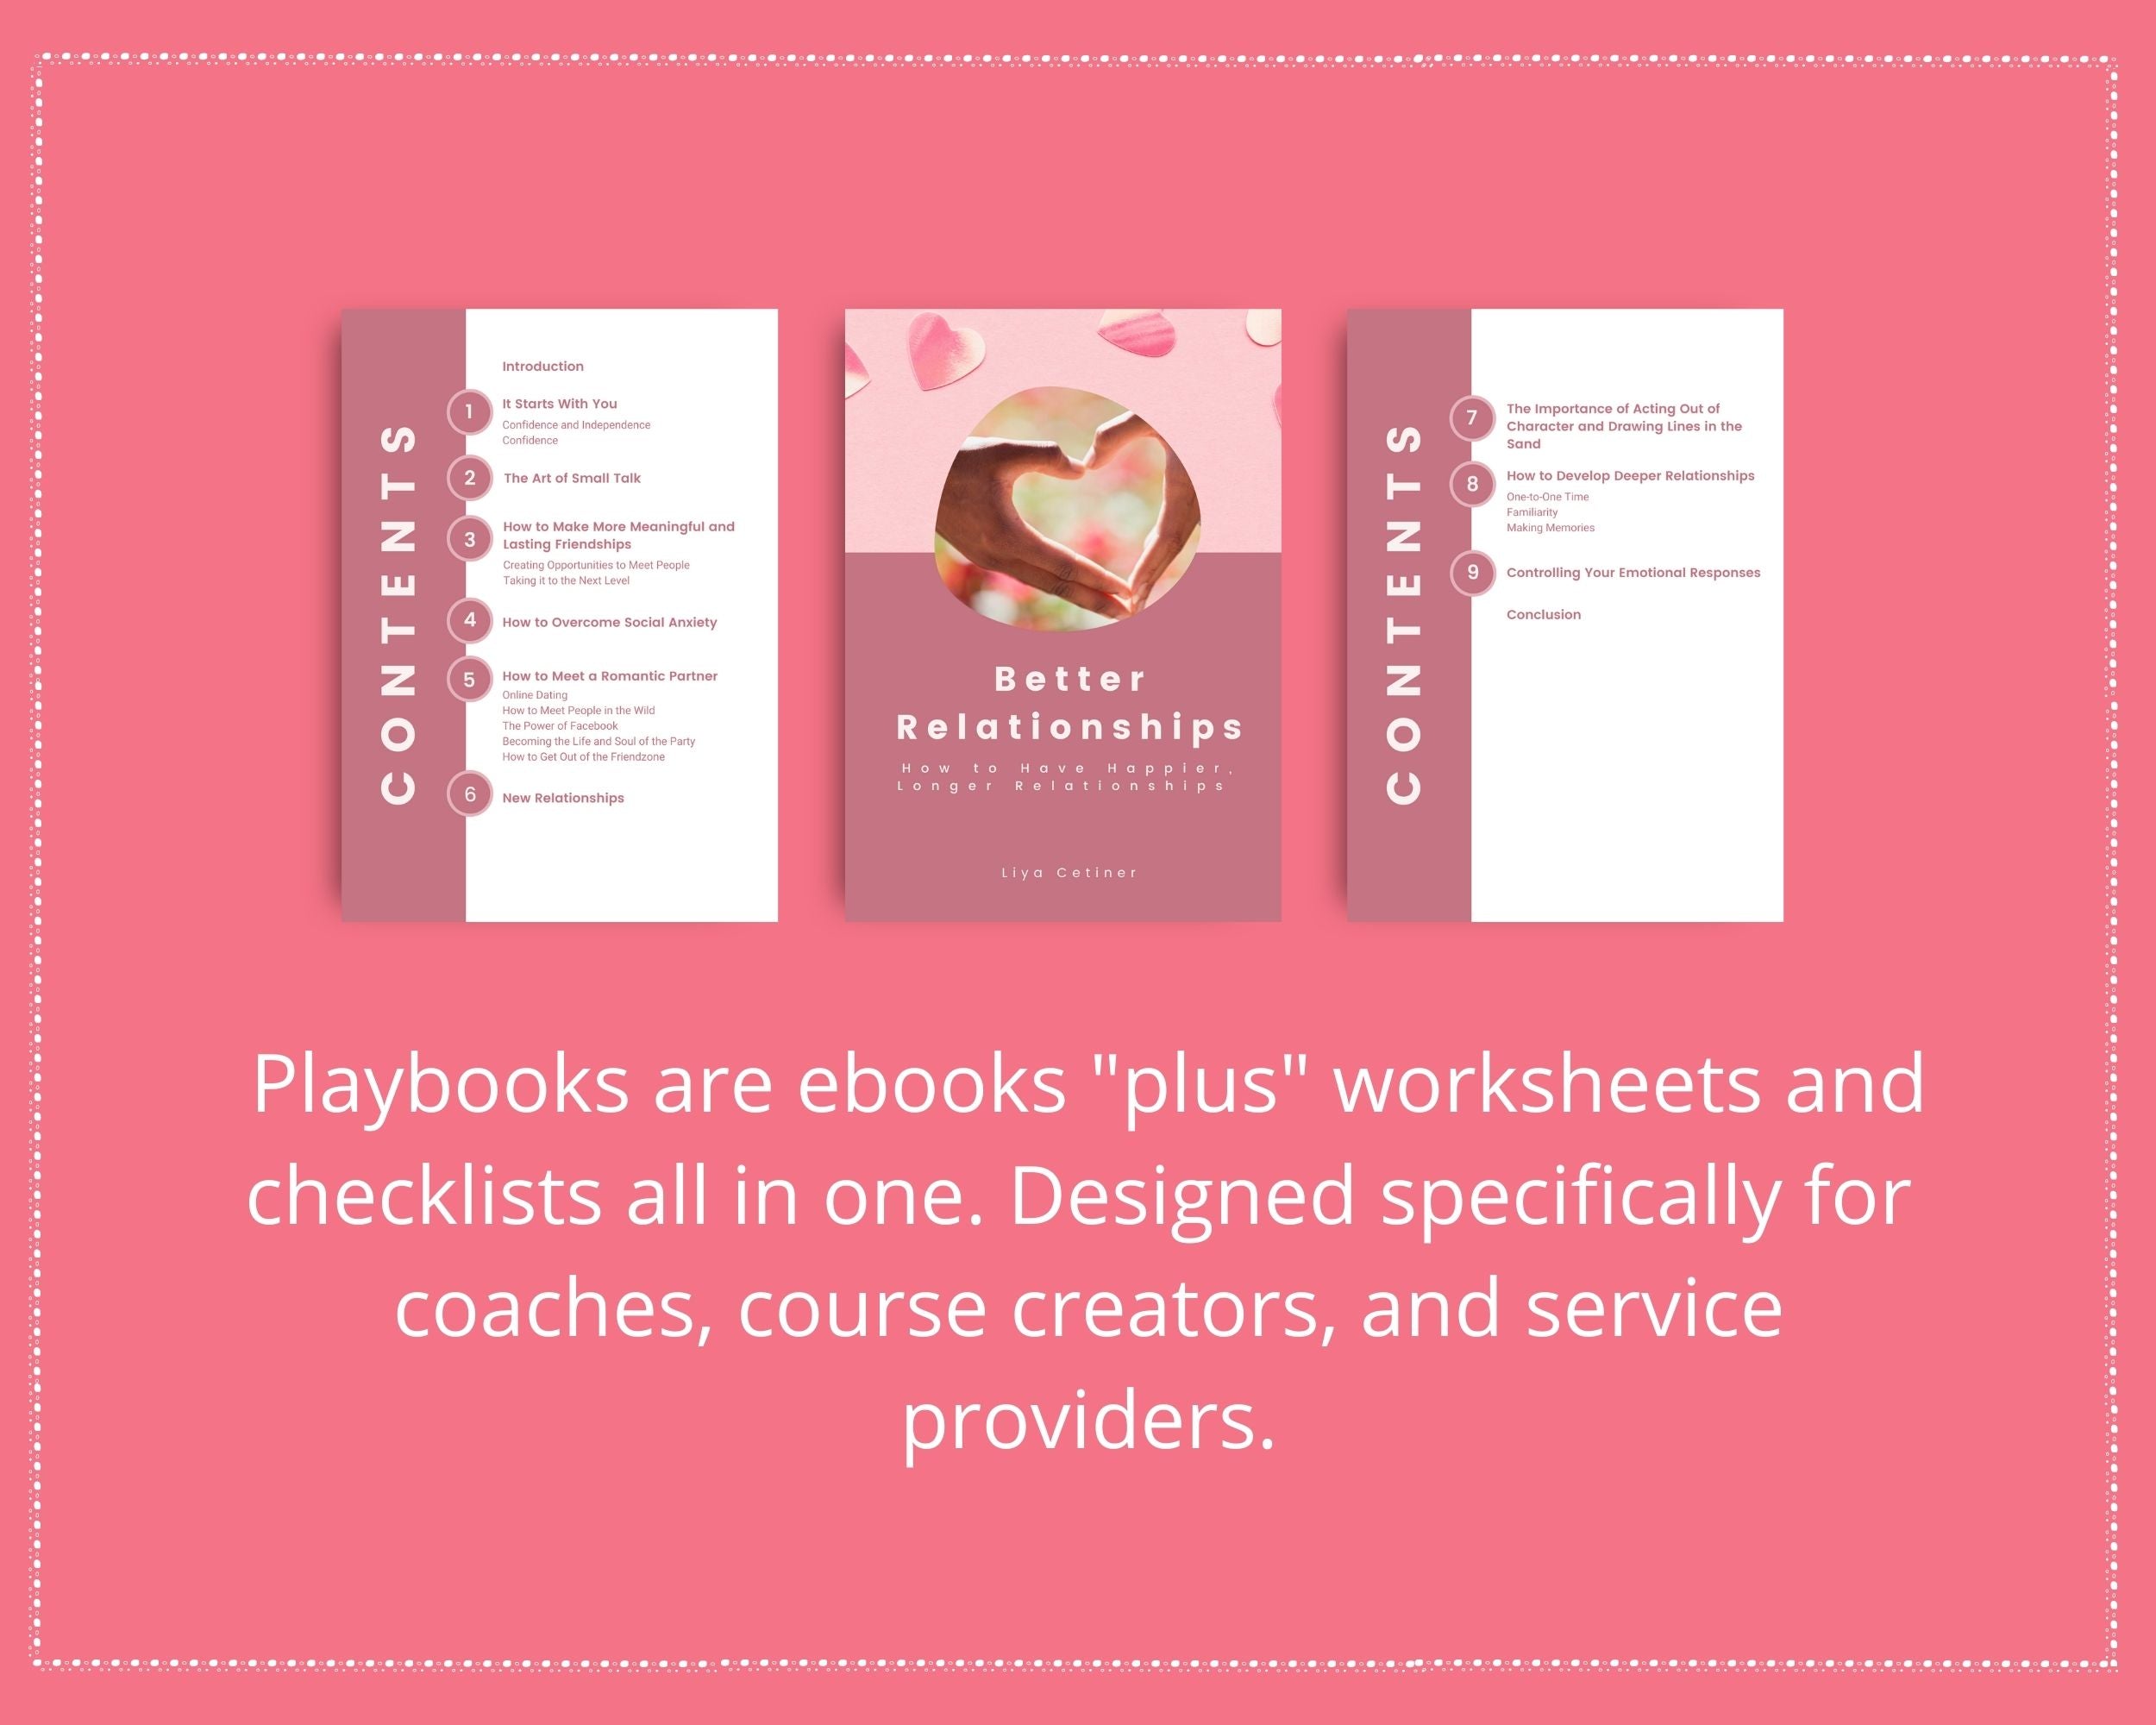 Done for You Better Relationship Playbook in Canva